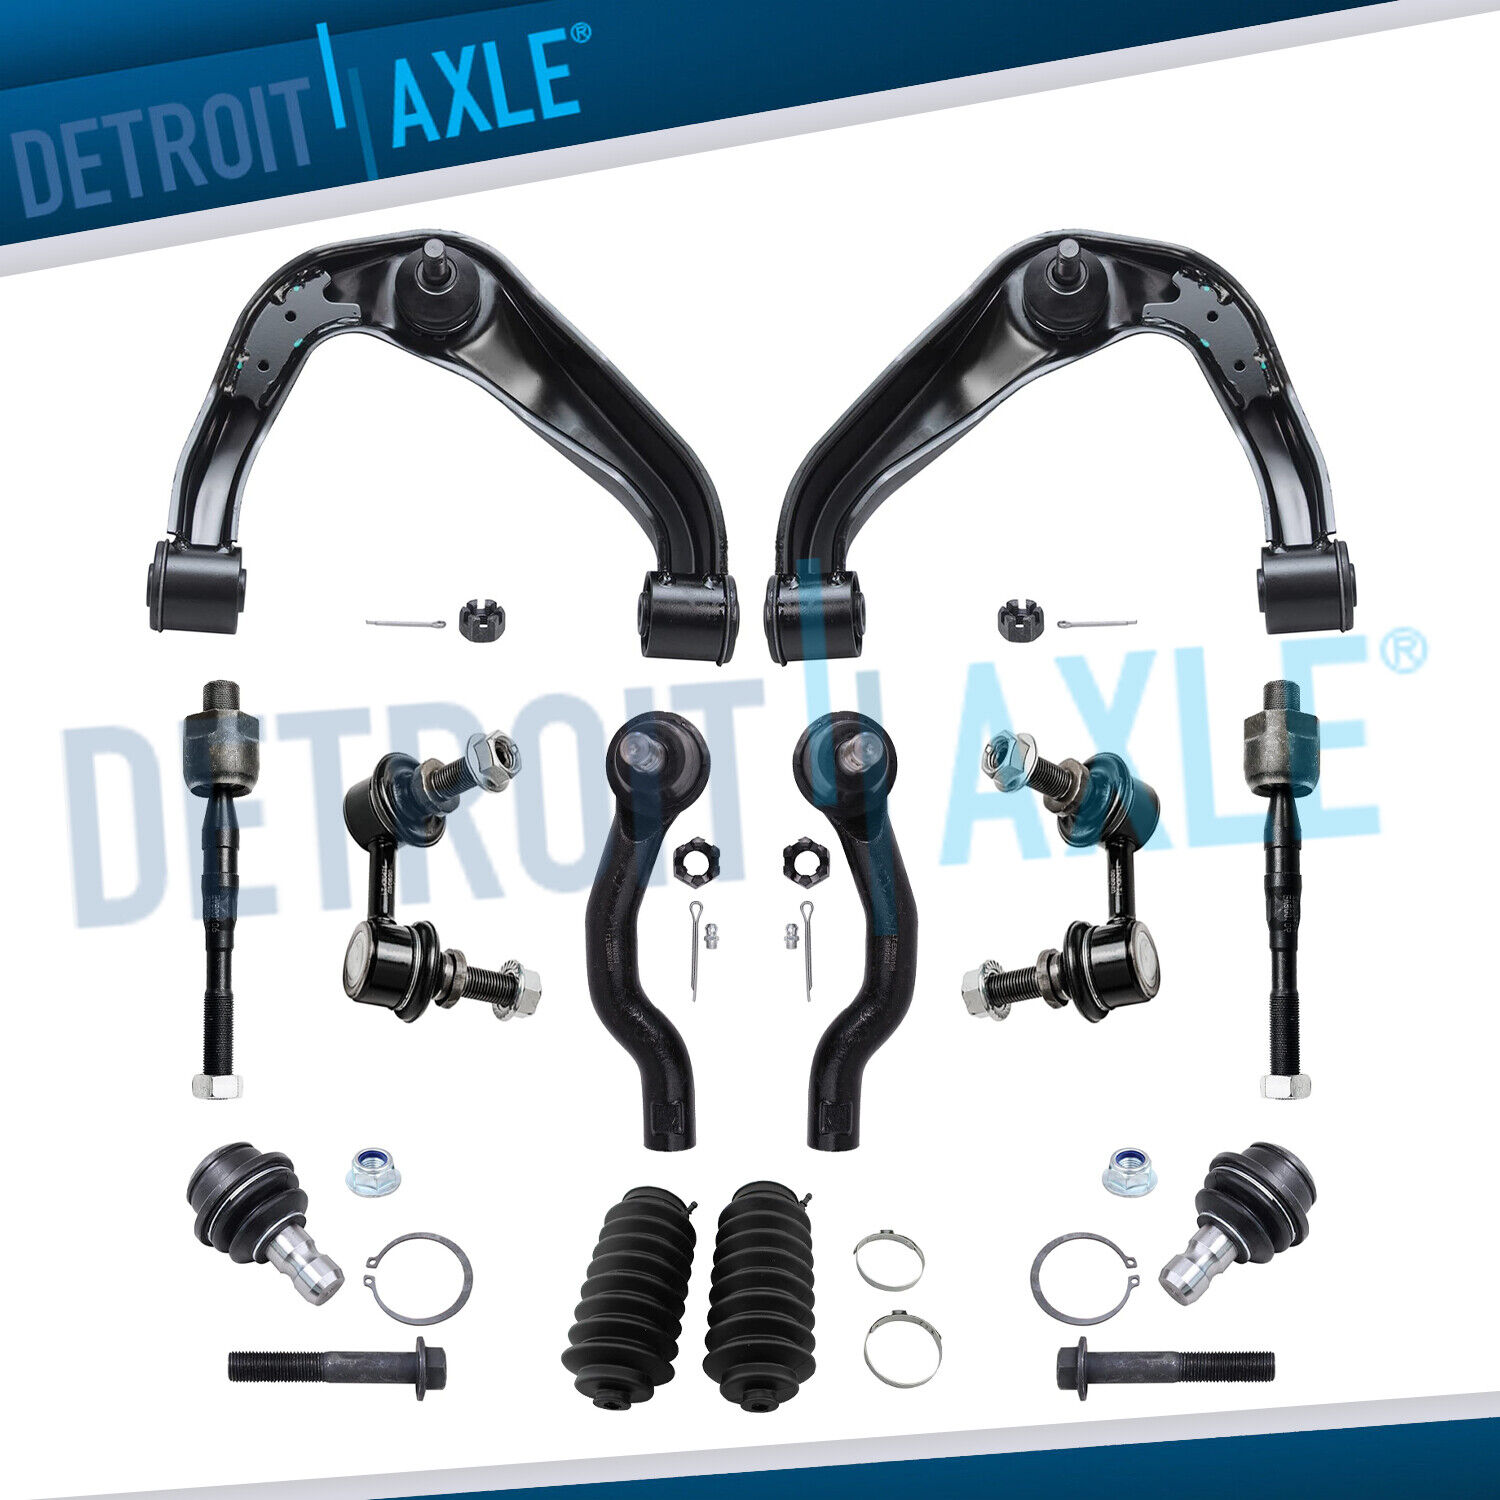 Brand New 12pc Complete Front Suspension Kit for Nissan Pathfinder and Frontier